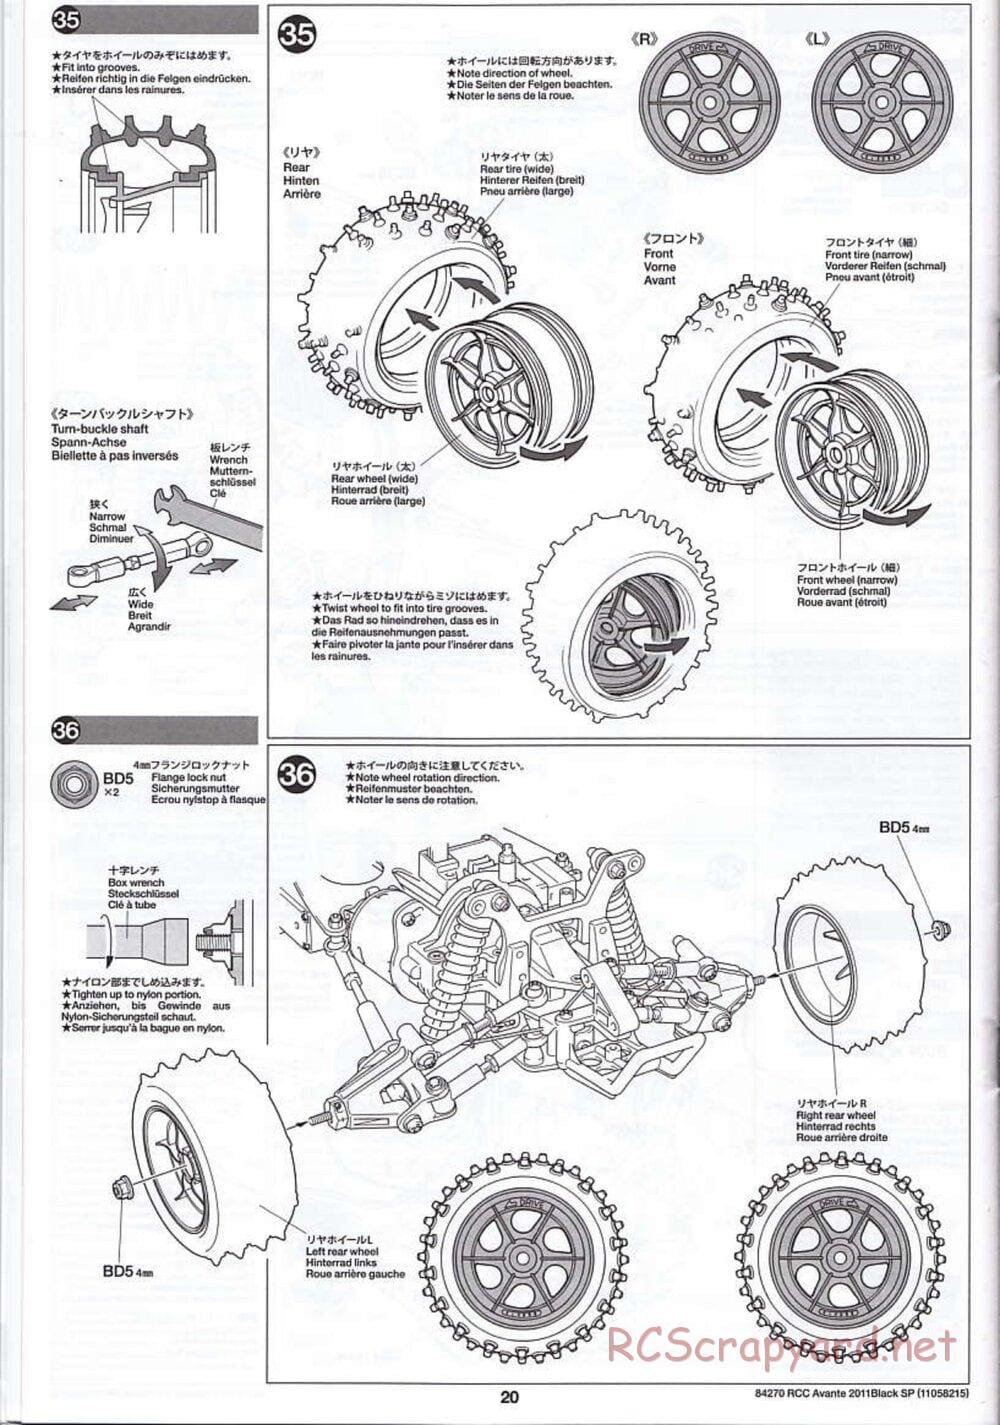 Tamiya - Avante 2011 - Black Special Chassis - Manual - Page 20